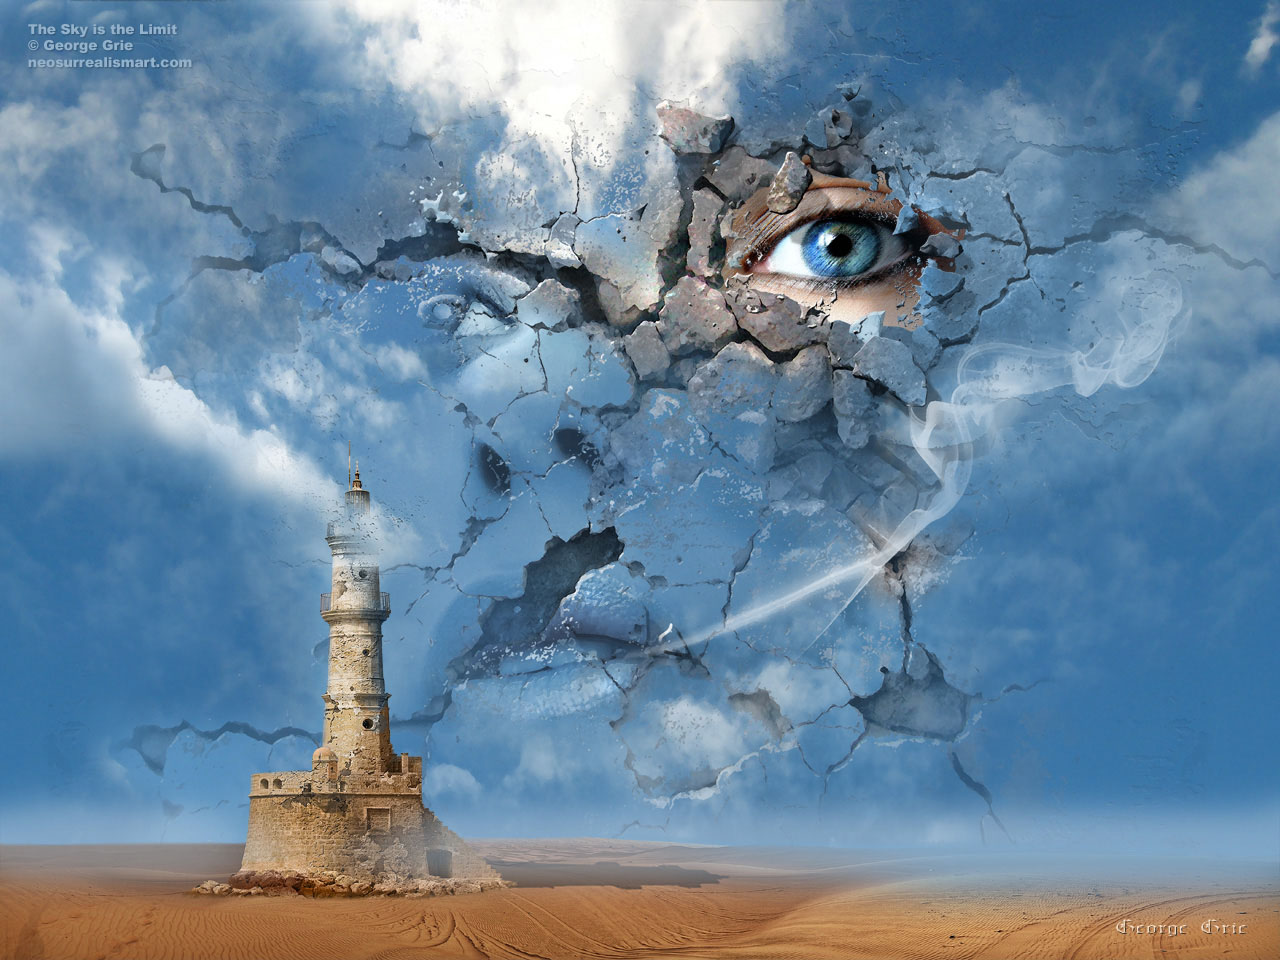 modern surrealism painting, contemporary surrealist graphic drawing, woman, face, sky, mysterious, sunny, female, clouds, away, portrait, creative, imagination, elegance, art, artistic, gothic, lighthouse, sand, dunes, lonely, abandoned, desert, nature, landscape, wall, cracks, old, background, stone, classic, weathered, scratches, illusion, retro, vintage, grunge, walls, dream, fictional, blue, art, shuttered, neo surreal, wallpaper, imaginary surrealism, fantasy, allegorical, three-dimensional, digital art, print poster 